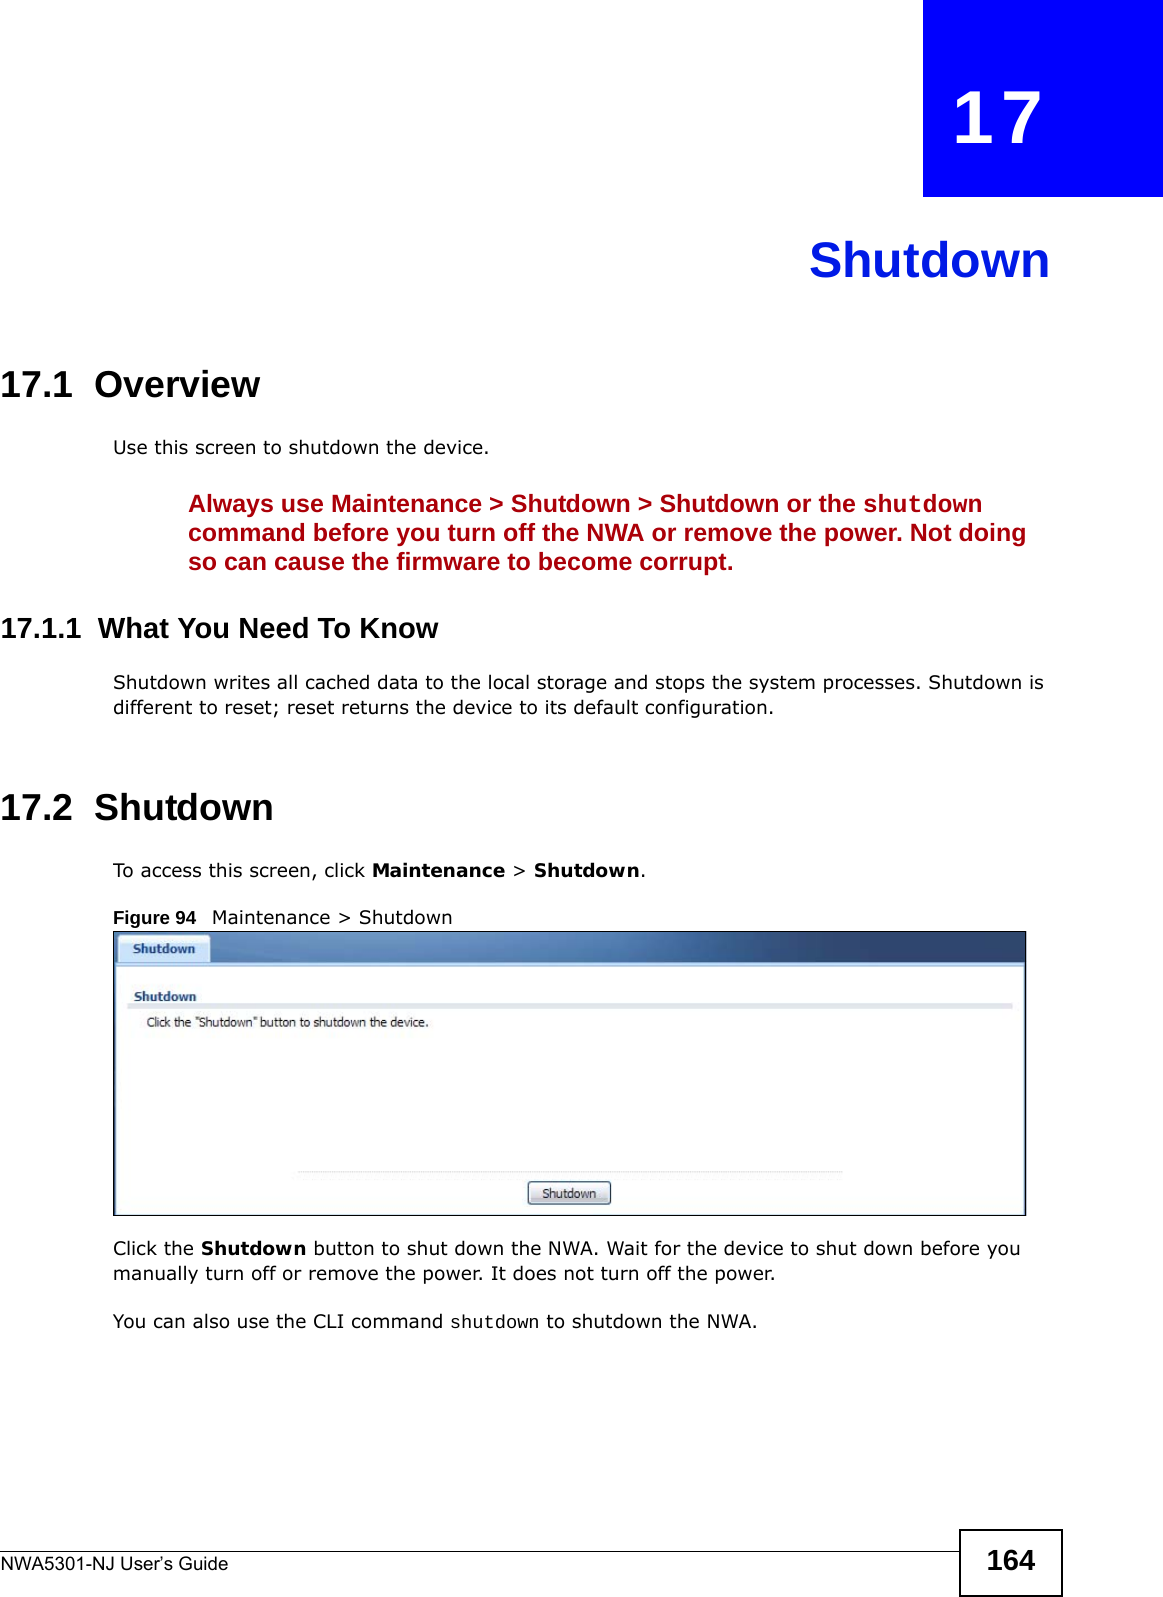 NWA5301-NJ User’s Guide 164CHAPTER   17Shutdown17.1  OverviewUse this screen to shutdown the device.Always use Maintenance &gt; Shutdown &gt; Shutdown or the shutdown command before you turn off the NWA or remove the power. Not doing so can cause the firmware to become corrupt. 17.1.1  What You Need To KnowShutdown writes all cached data to the local storage and stops the system processes. Shutdown is different to reset; reset returns the device to its default configuration.17.2  ShutdownTo access this screen, click Maintenance &gt; Shutdown.Figure 94   Maintenance &gt; ShutdownClick the Shutdown button to shut down the NWA. Wait for the device to shut down before you manually turn off or remove the power. It does not turn off the power. You can also use the CLI command shutdown to shutdown the NWA.